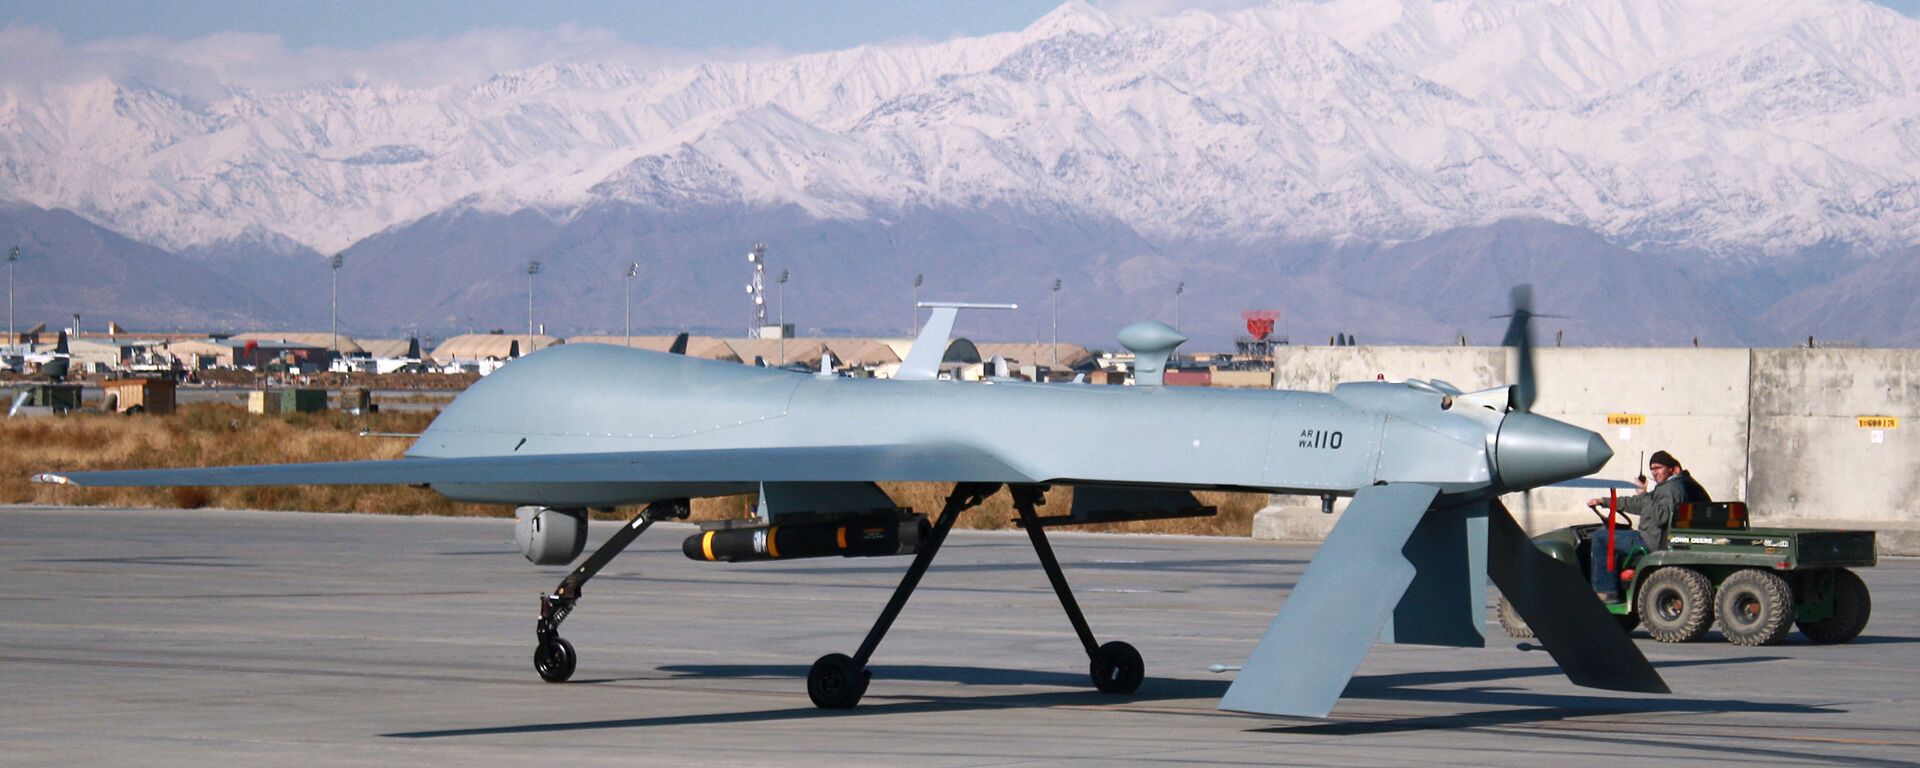 US Predator unmanned drone armed with a missile setting off from its hangar at Bagram air base in Afghanistan, November 27, 2009. - Sputnik International, 1920, 01.07.2016